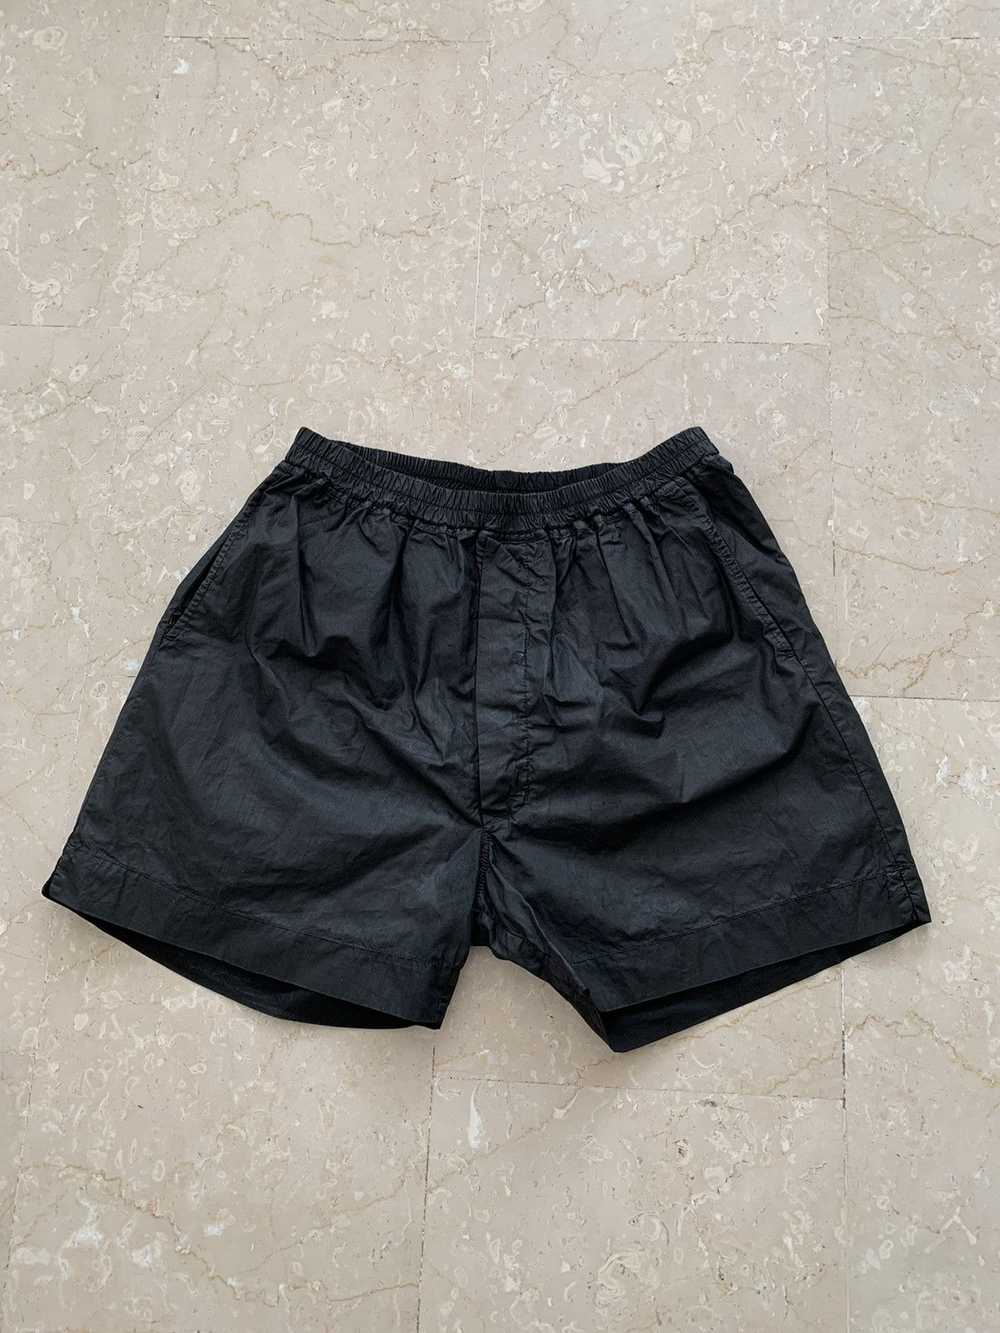 Rick Owens Drkshdw Waxed lightweight cotton shorts - image 1